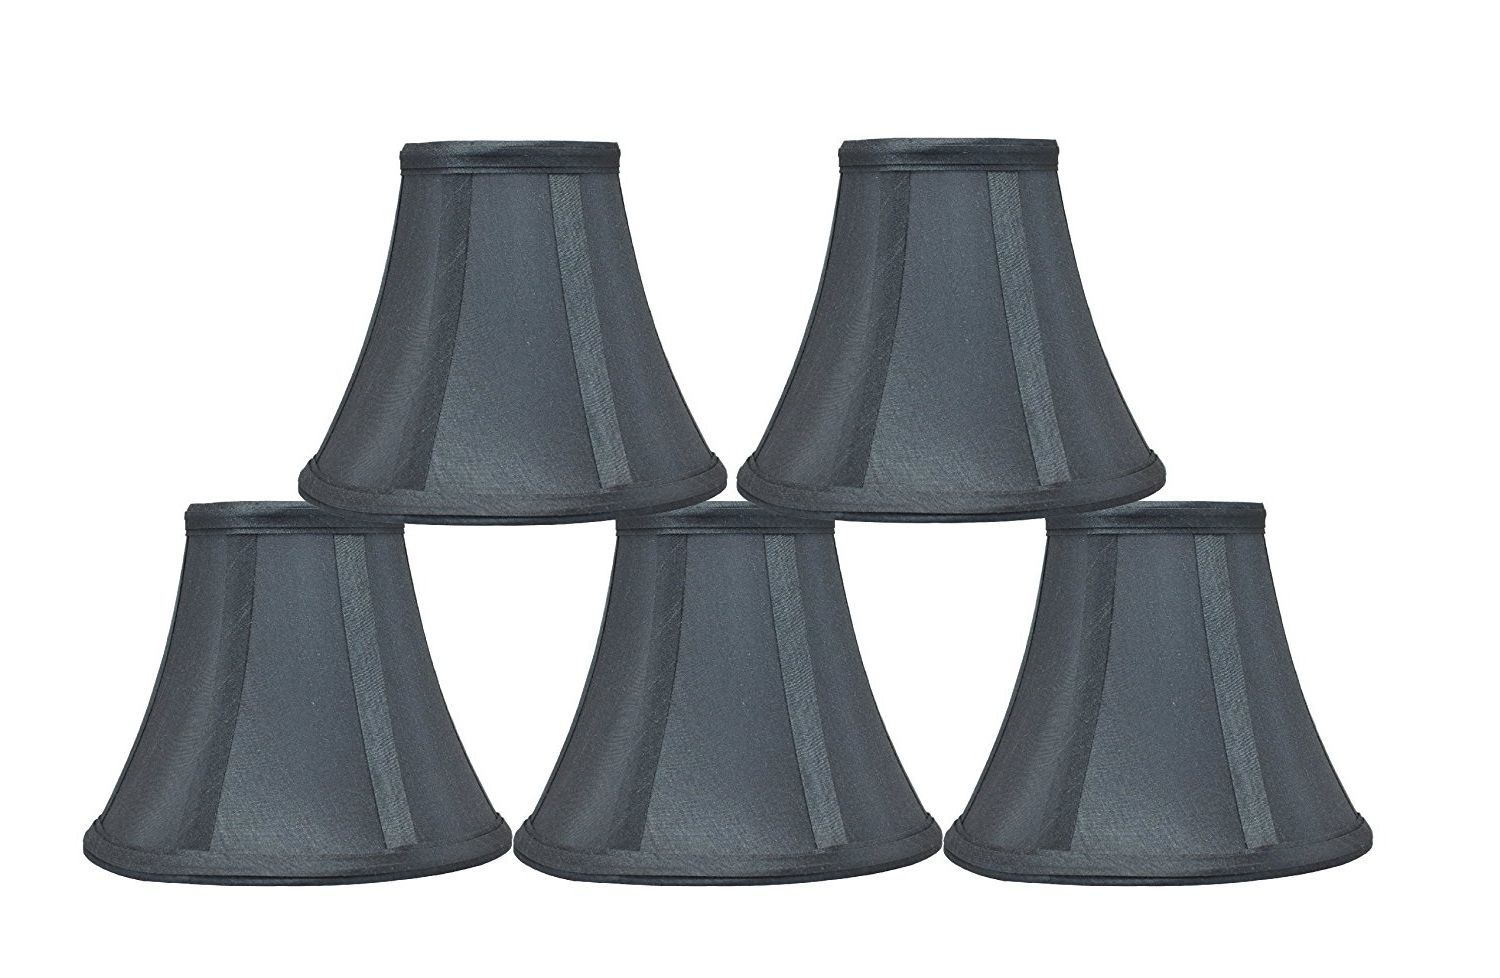 Urbanest 6 Inch Bell Chandelier Lamp Shade, Gray, Clip On, Set Of 5 Pertaining To Widely Used Chandelier Lamp Shades (View 12 of 15)